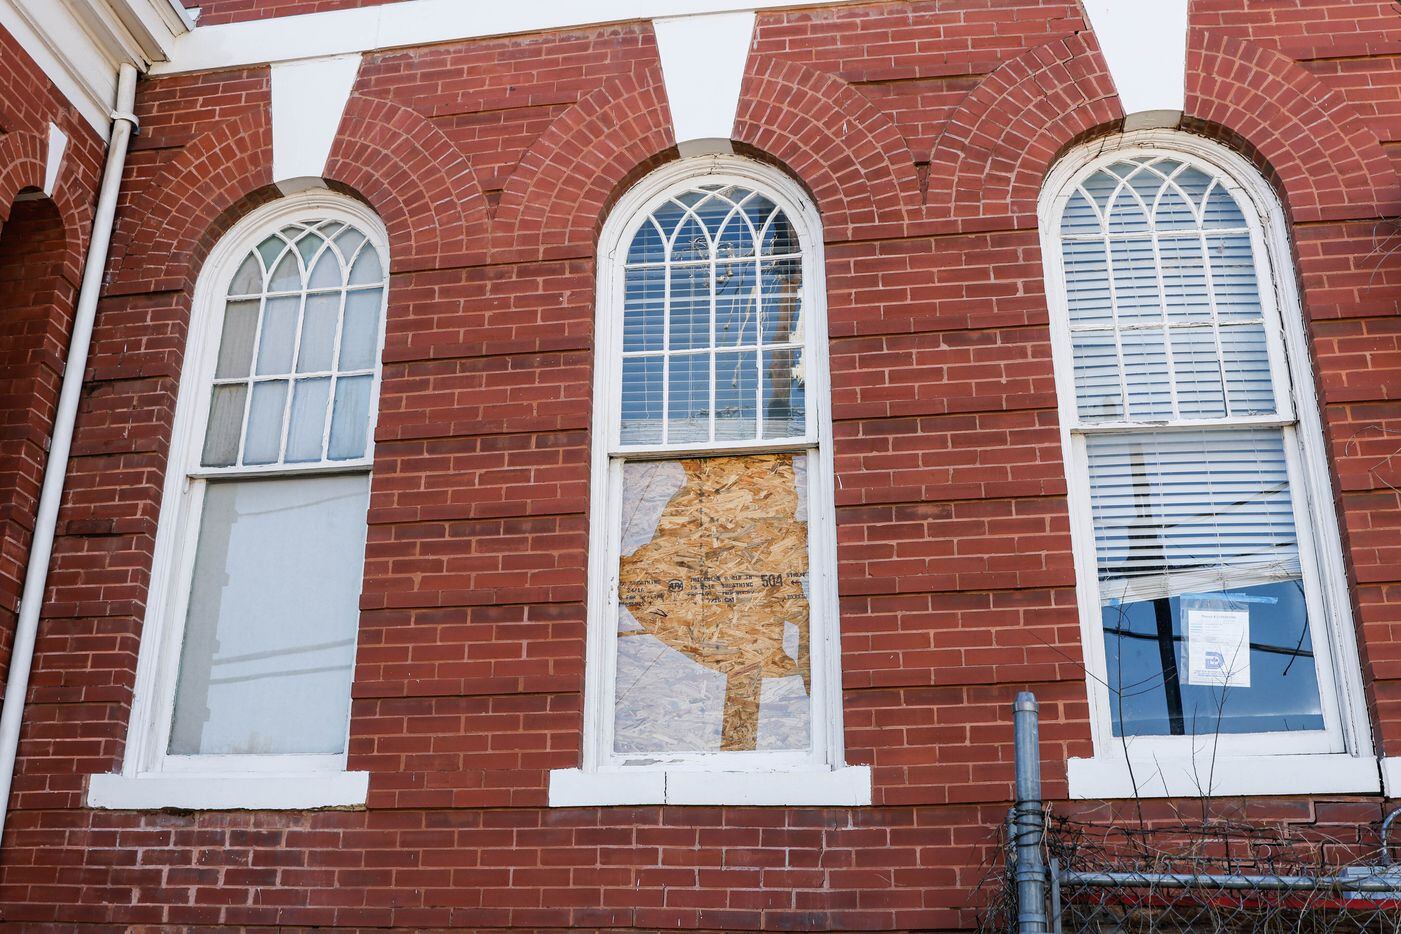 Another of the broken windows in the former Sisters of Divine Providence school.